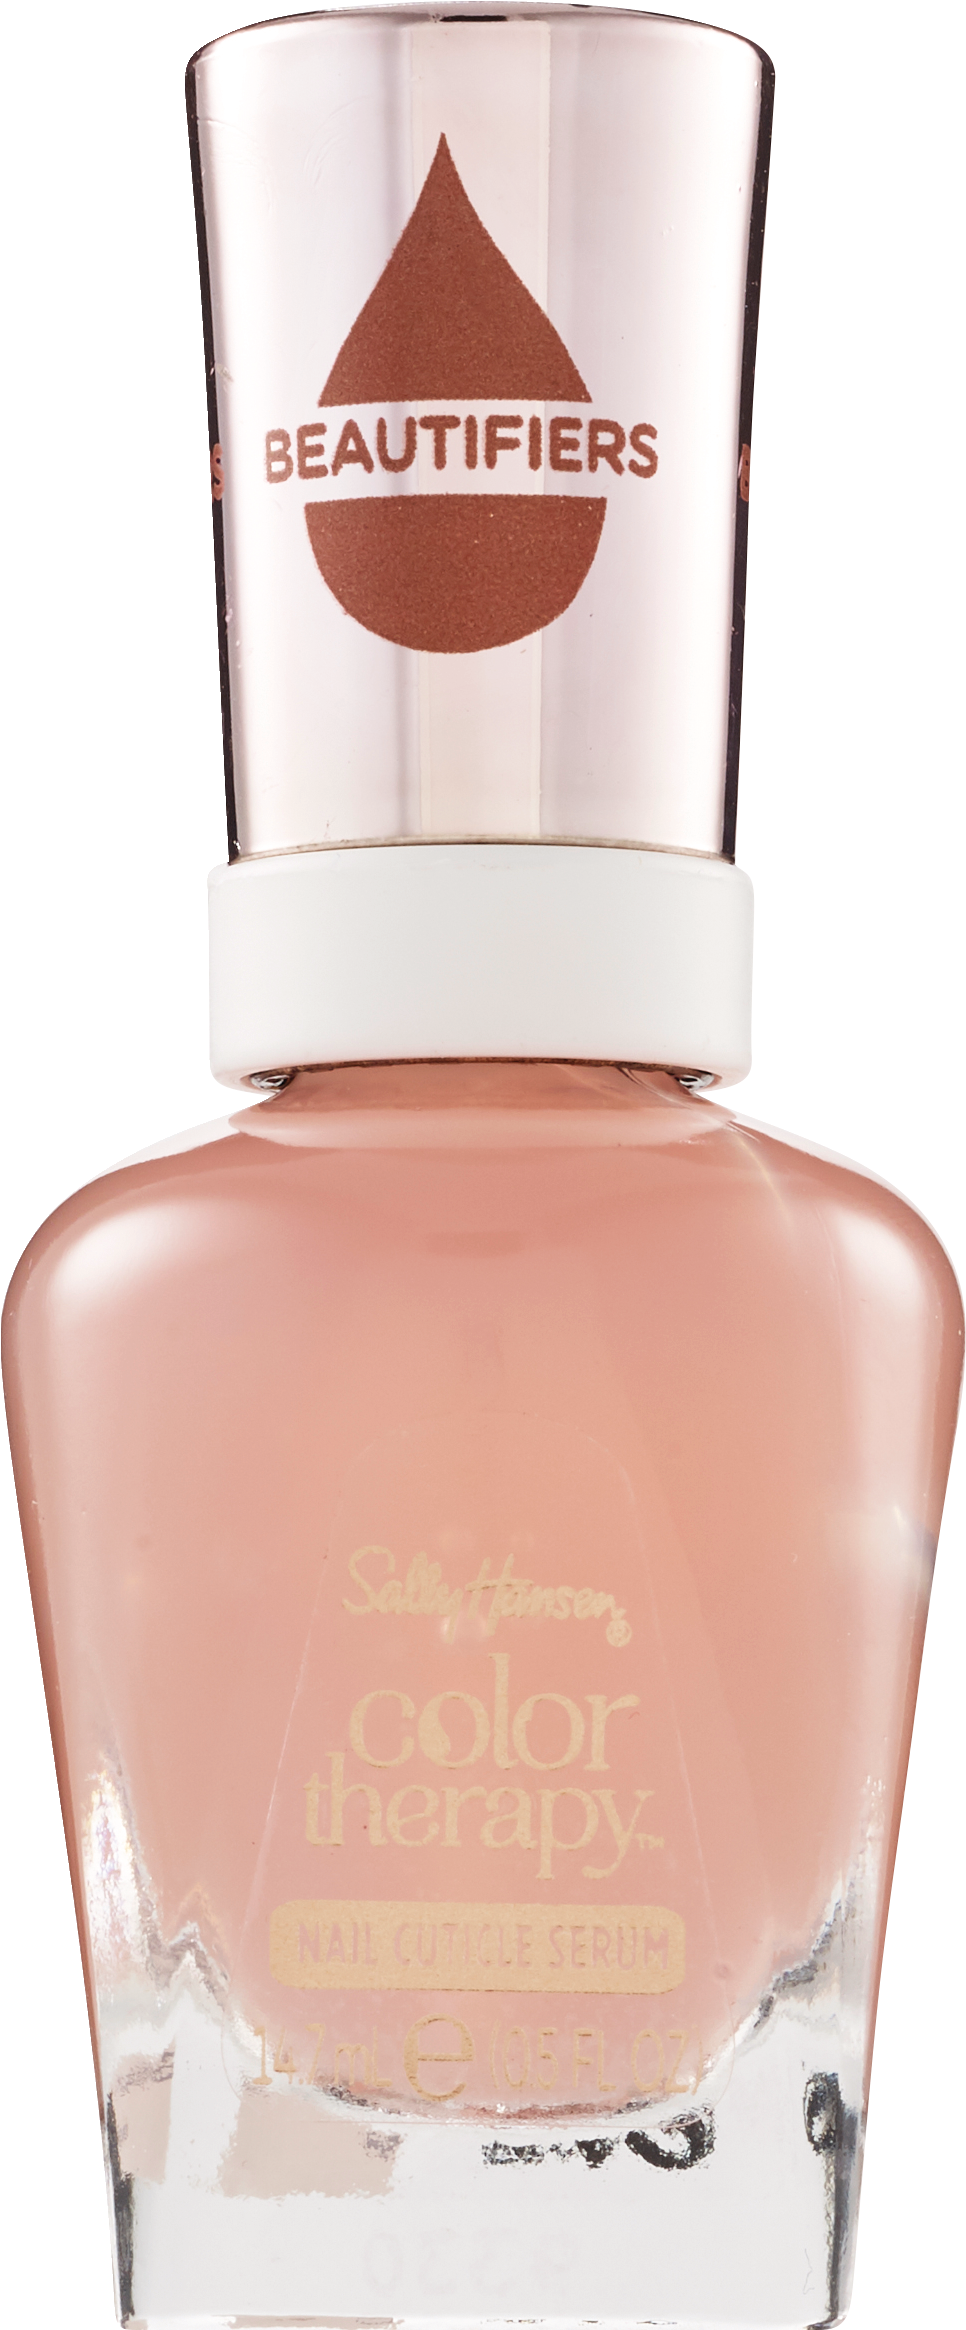 Sally Hansen Color Therapy Beautifiers Nail Corrector,  OZ | Pick Up In  Store TODAY at CVS